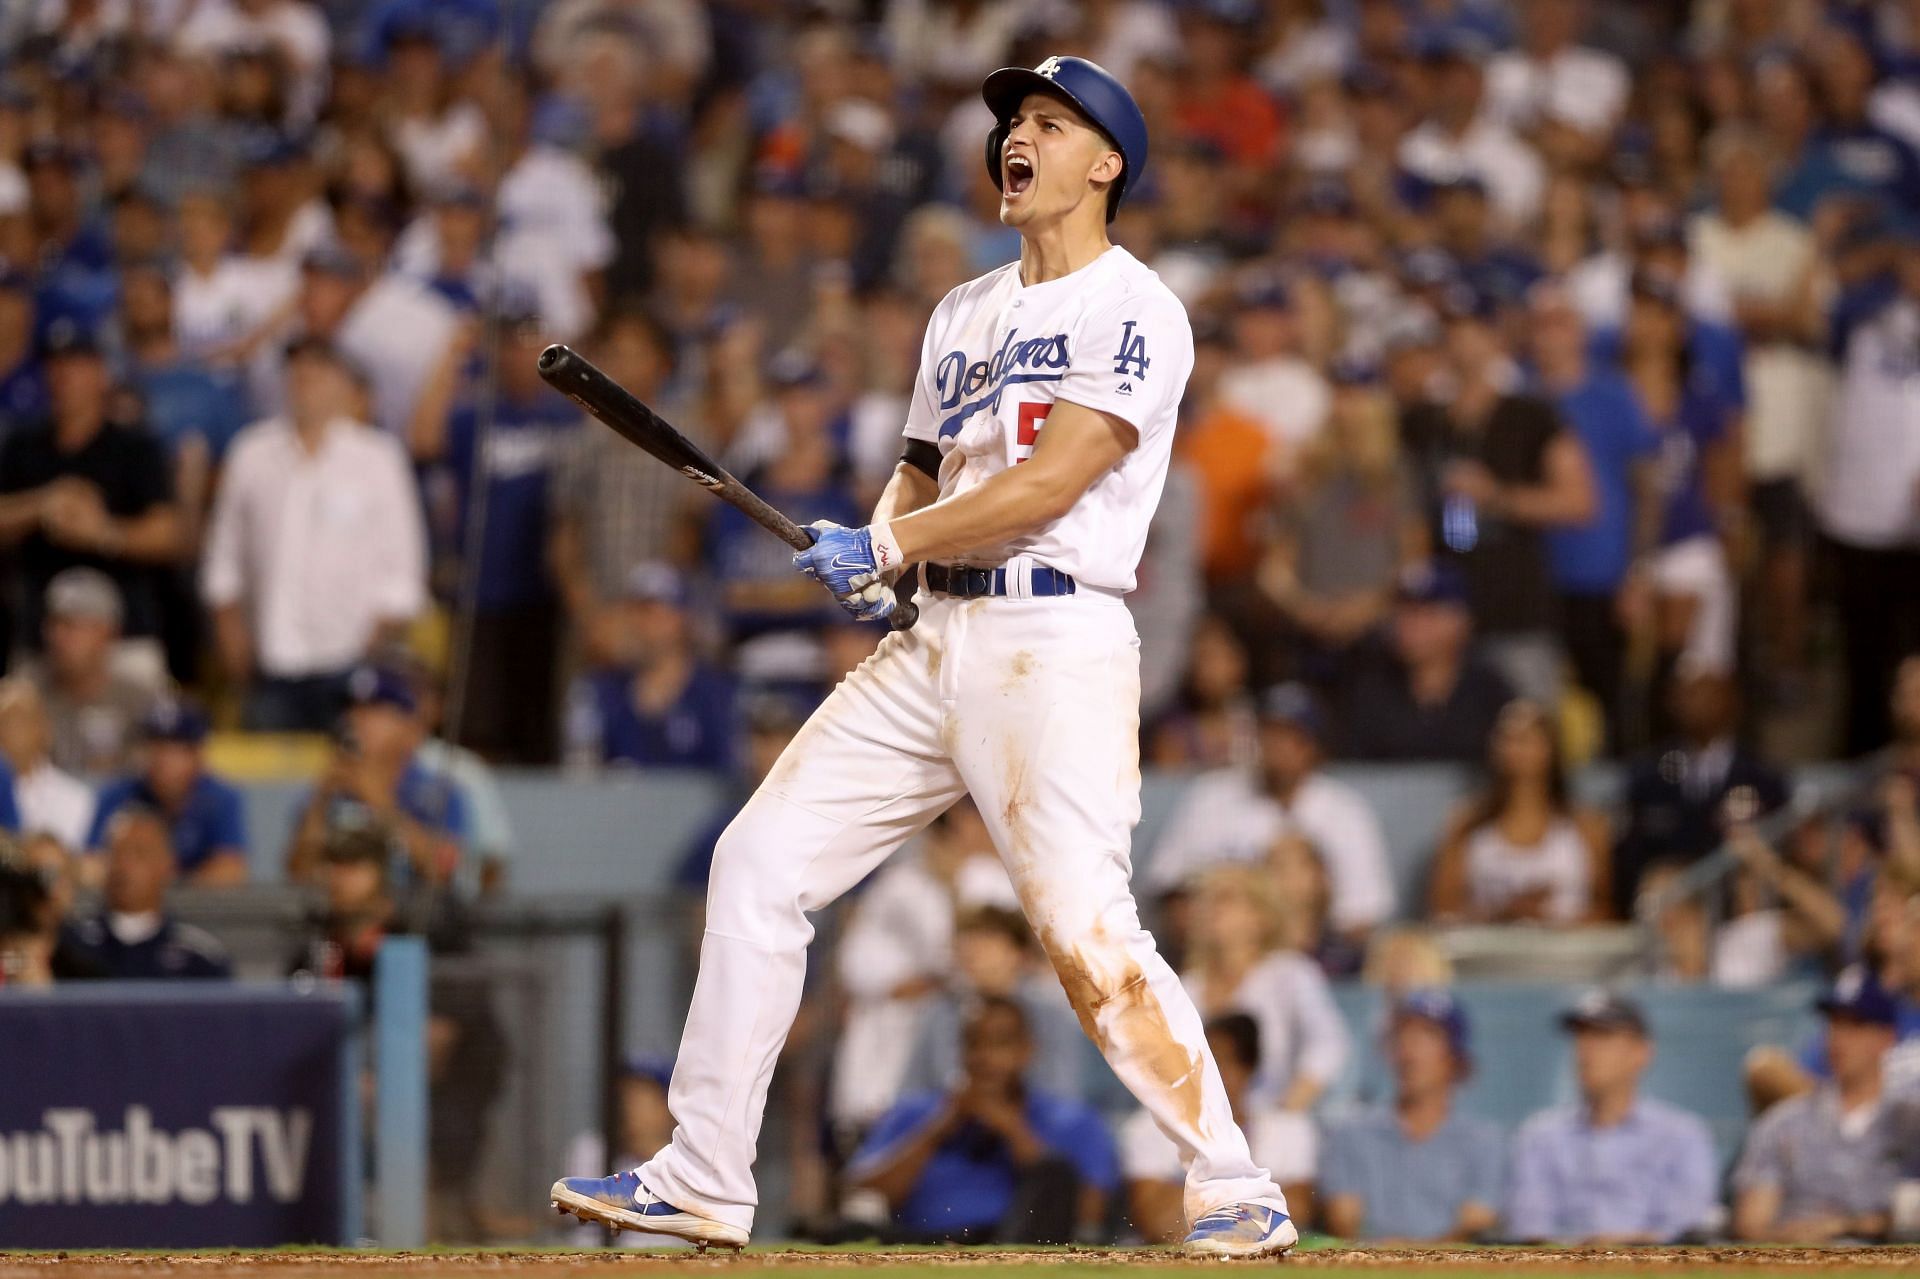 The Rangers, who had a free agency spree, landed former World Series MVP Seager